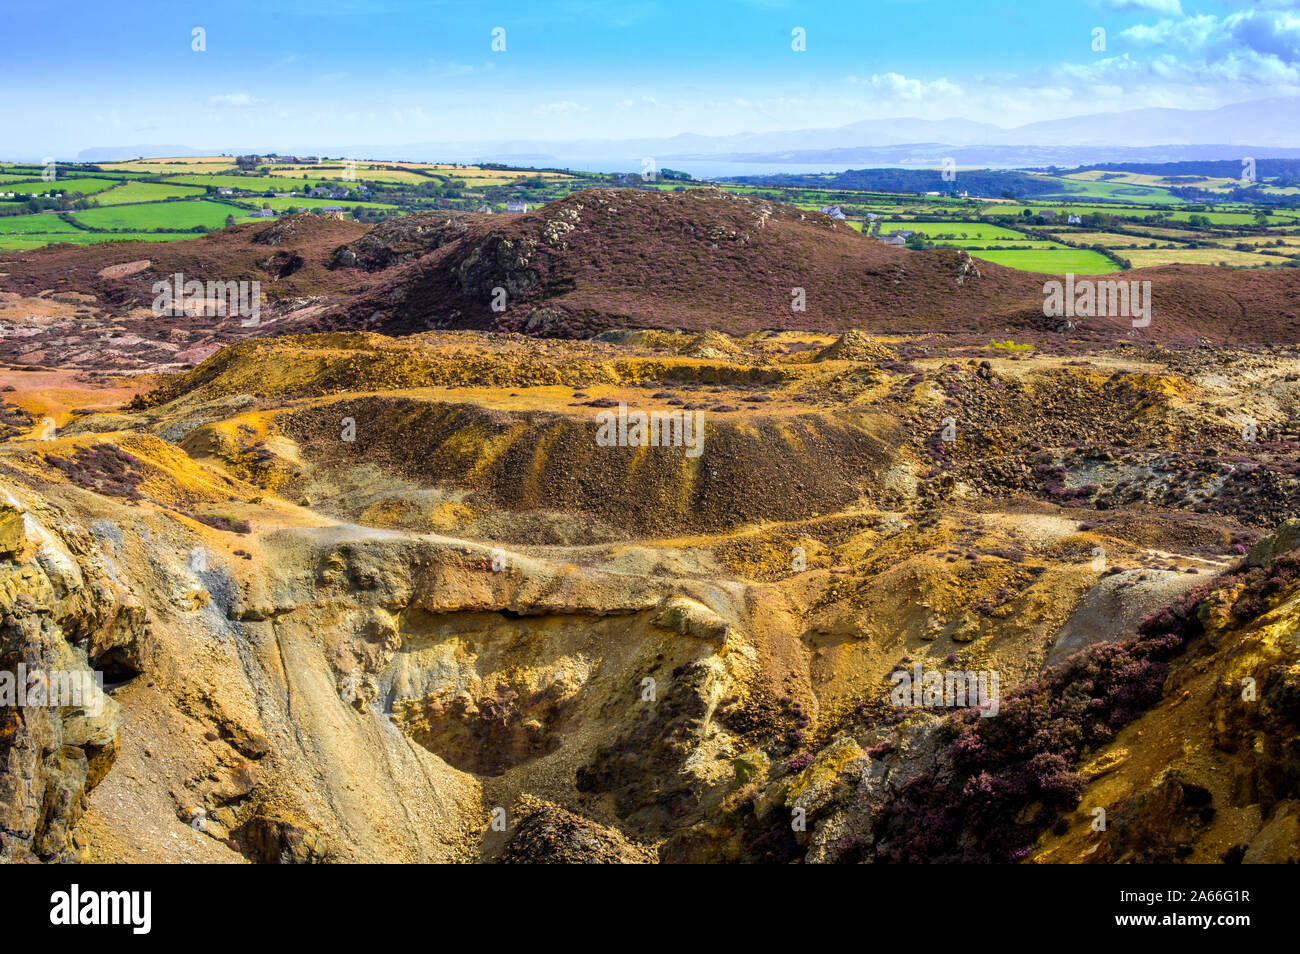 The quarry where copper ore was mined, the ore and spoil were removed using manual labour and hand tools. Stock Photo